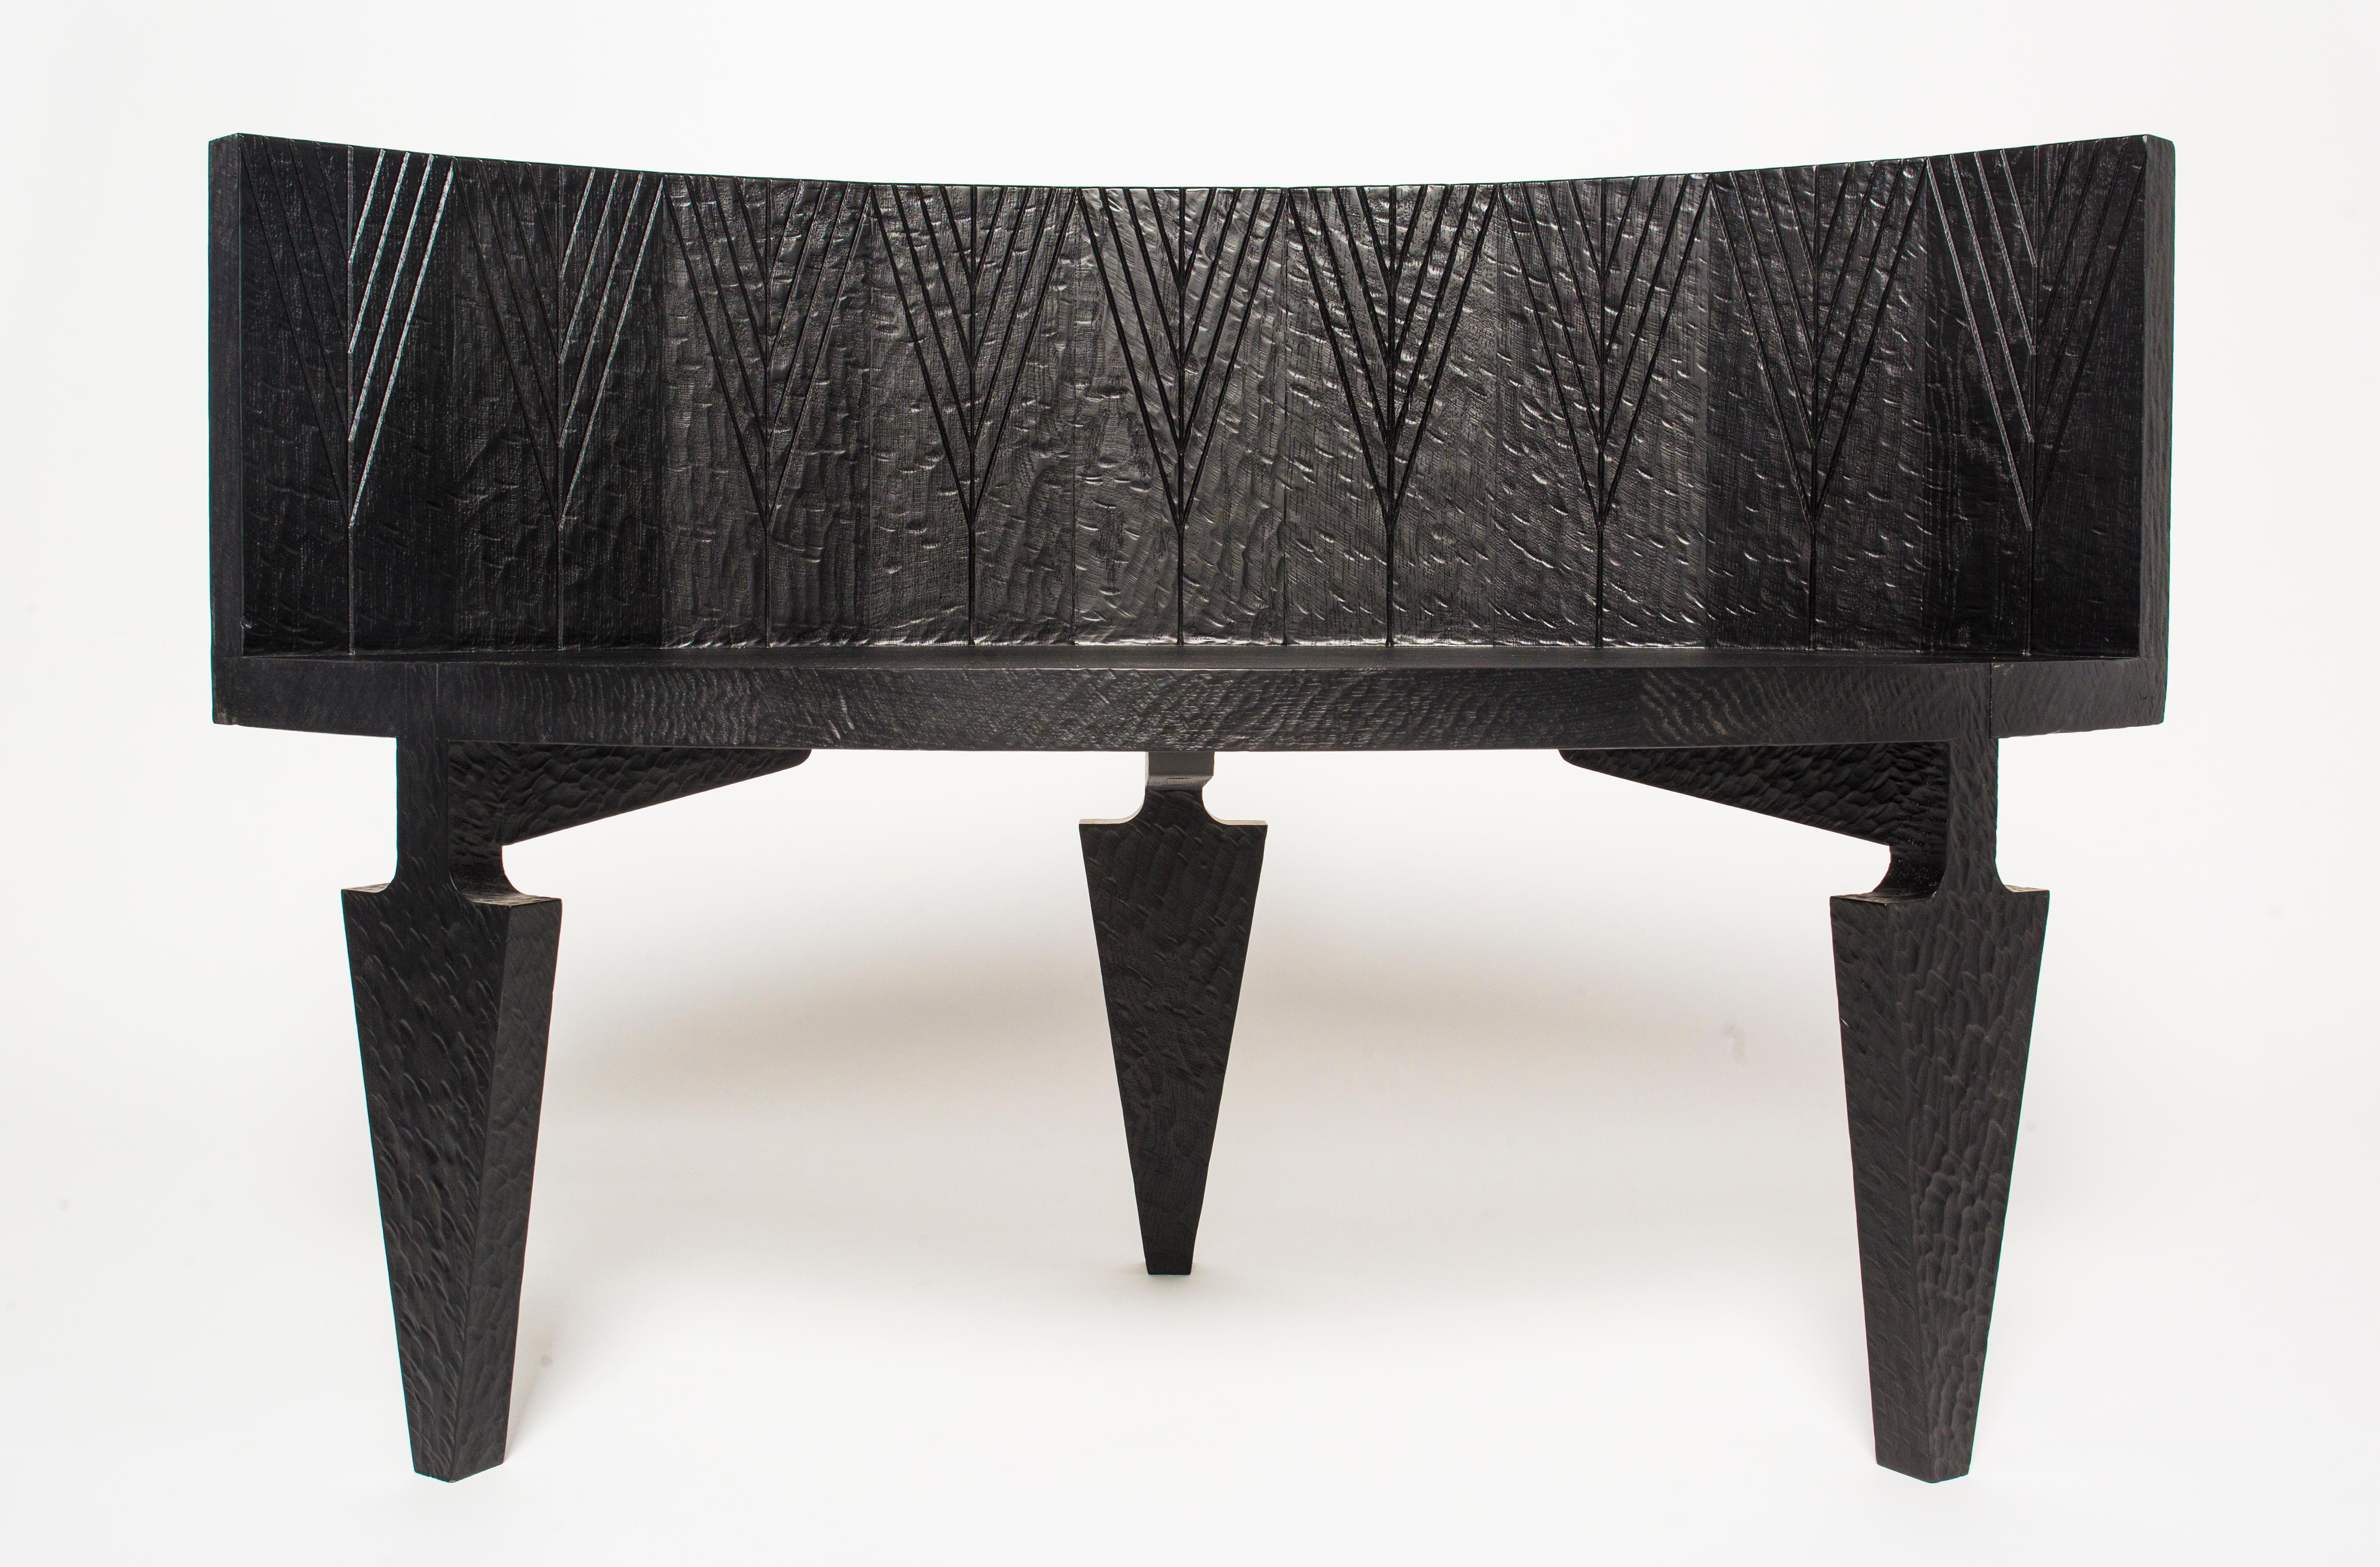 Sculpted oak armchair signed by Semen Lavdansky
Material: Oak
Dimensions: 74 x 116 x 58 cm
Can be made to order in different dimensions.